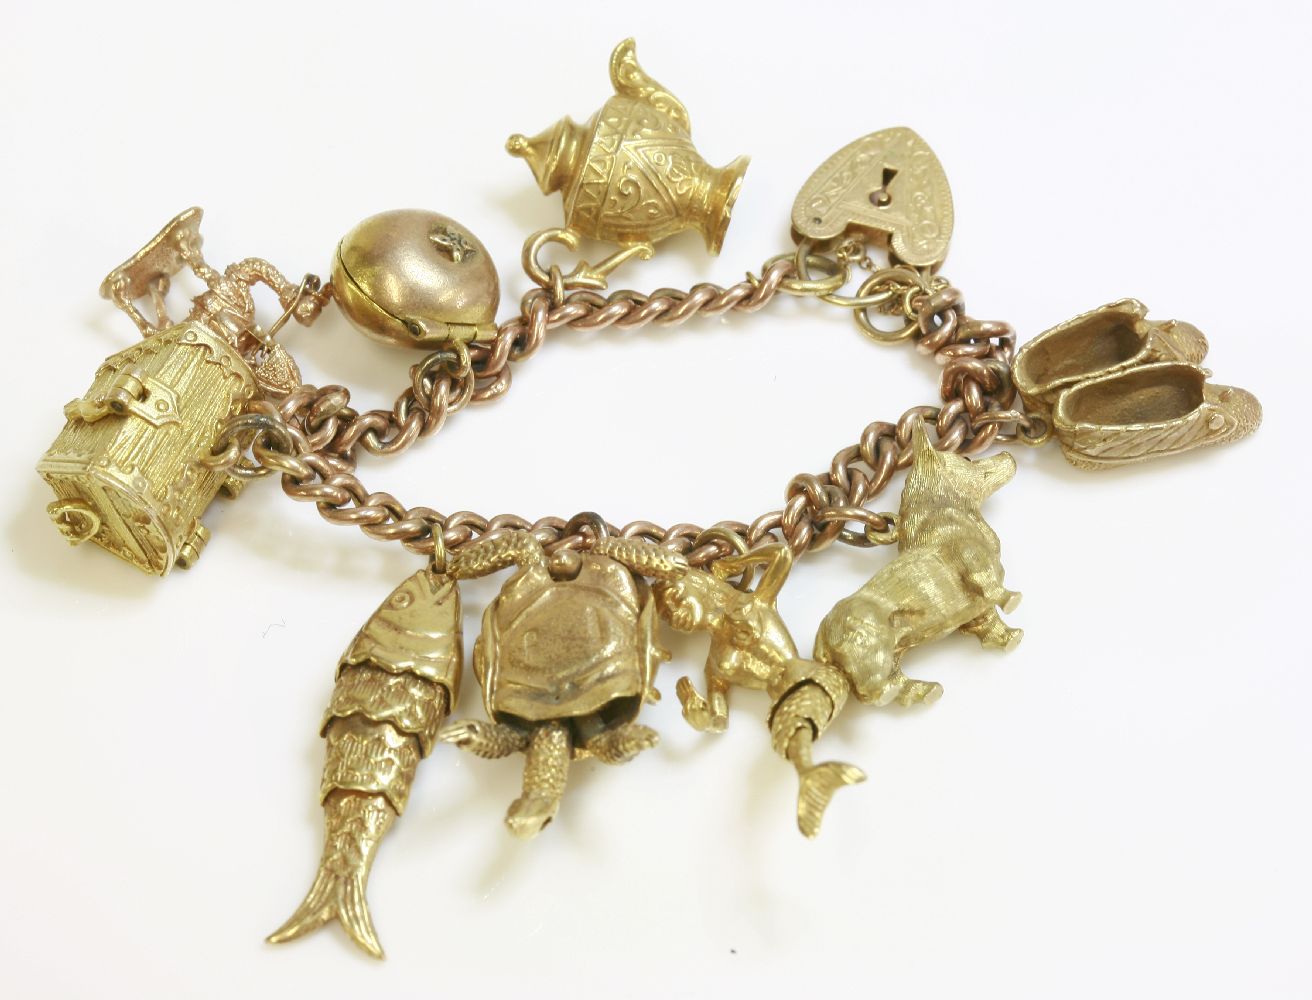 A gold curb link charm bracelet, marked 9ct, hung with seven 9ct gold charms, including a corgi